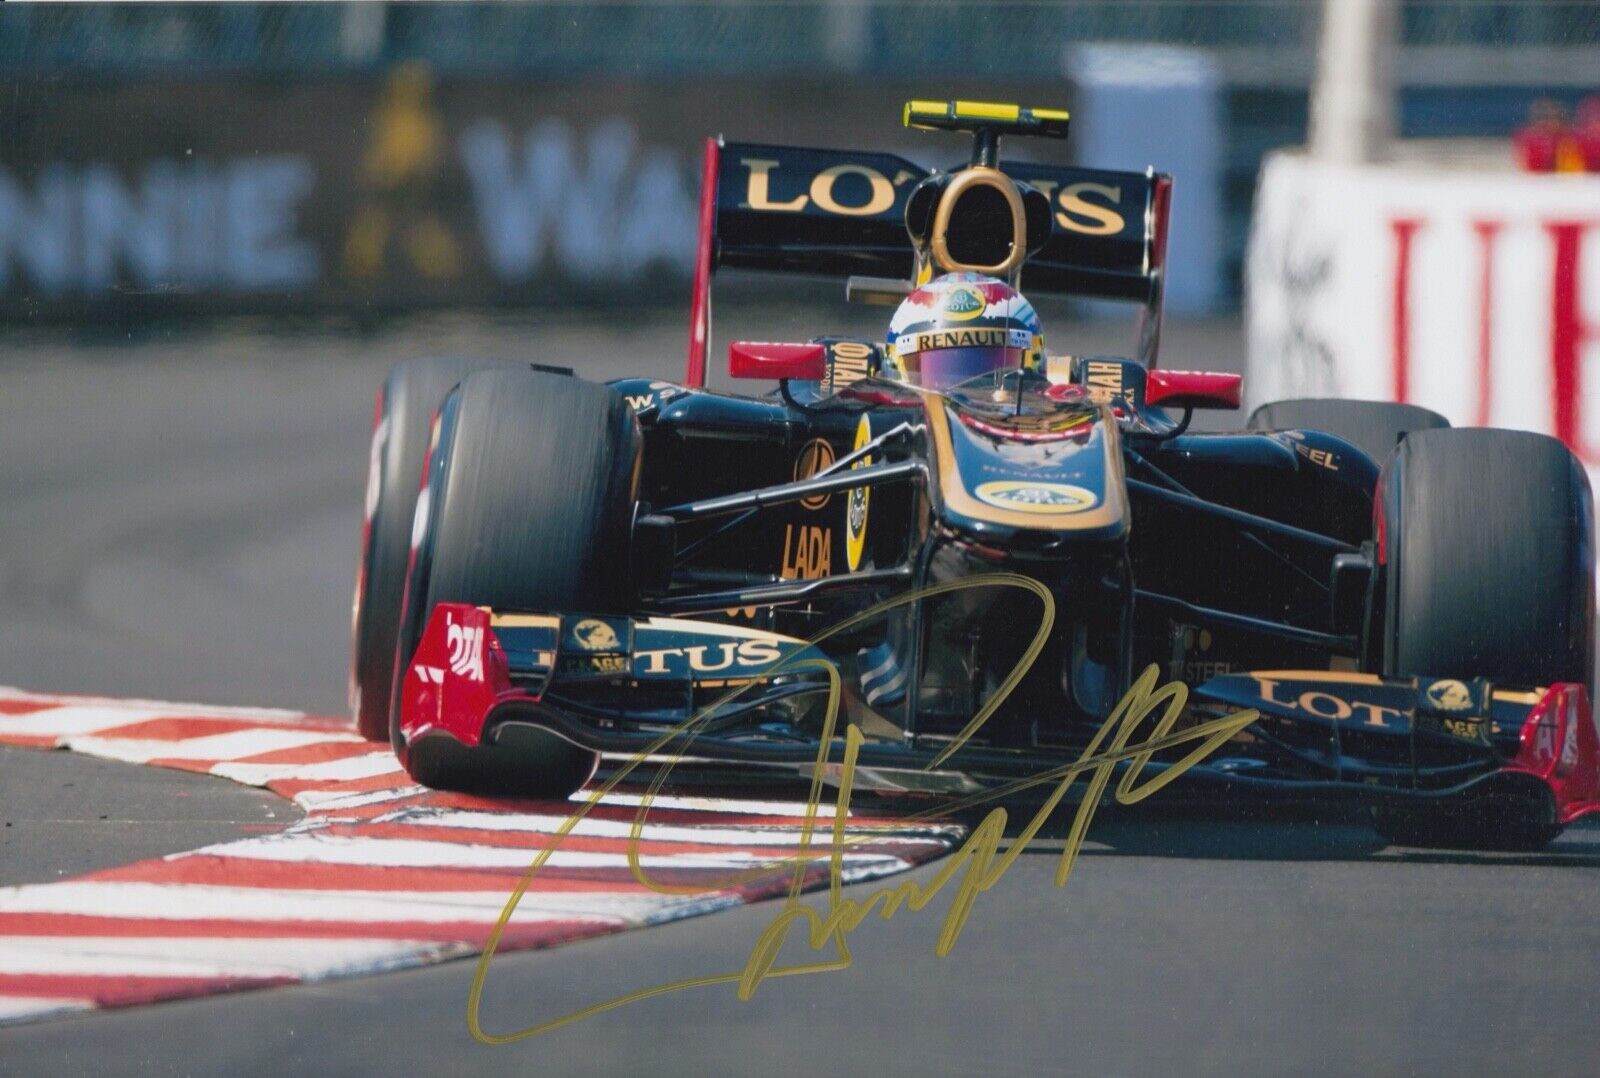 Vitaly Petrov Hand Signed 12x8 Photo Poster painting F1 Autograph Lotus Renault GP 1